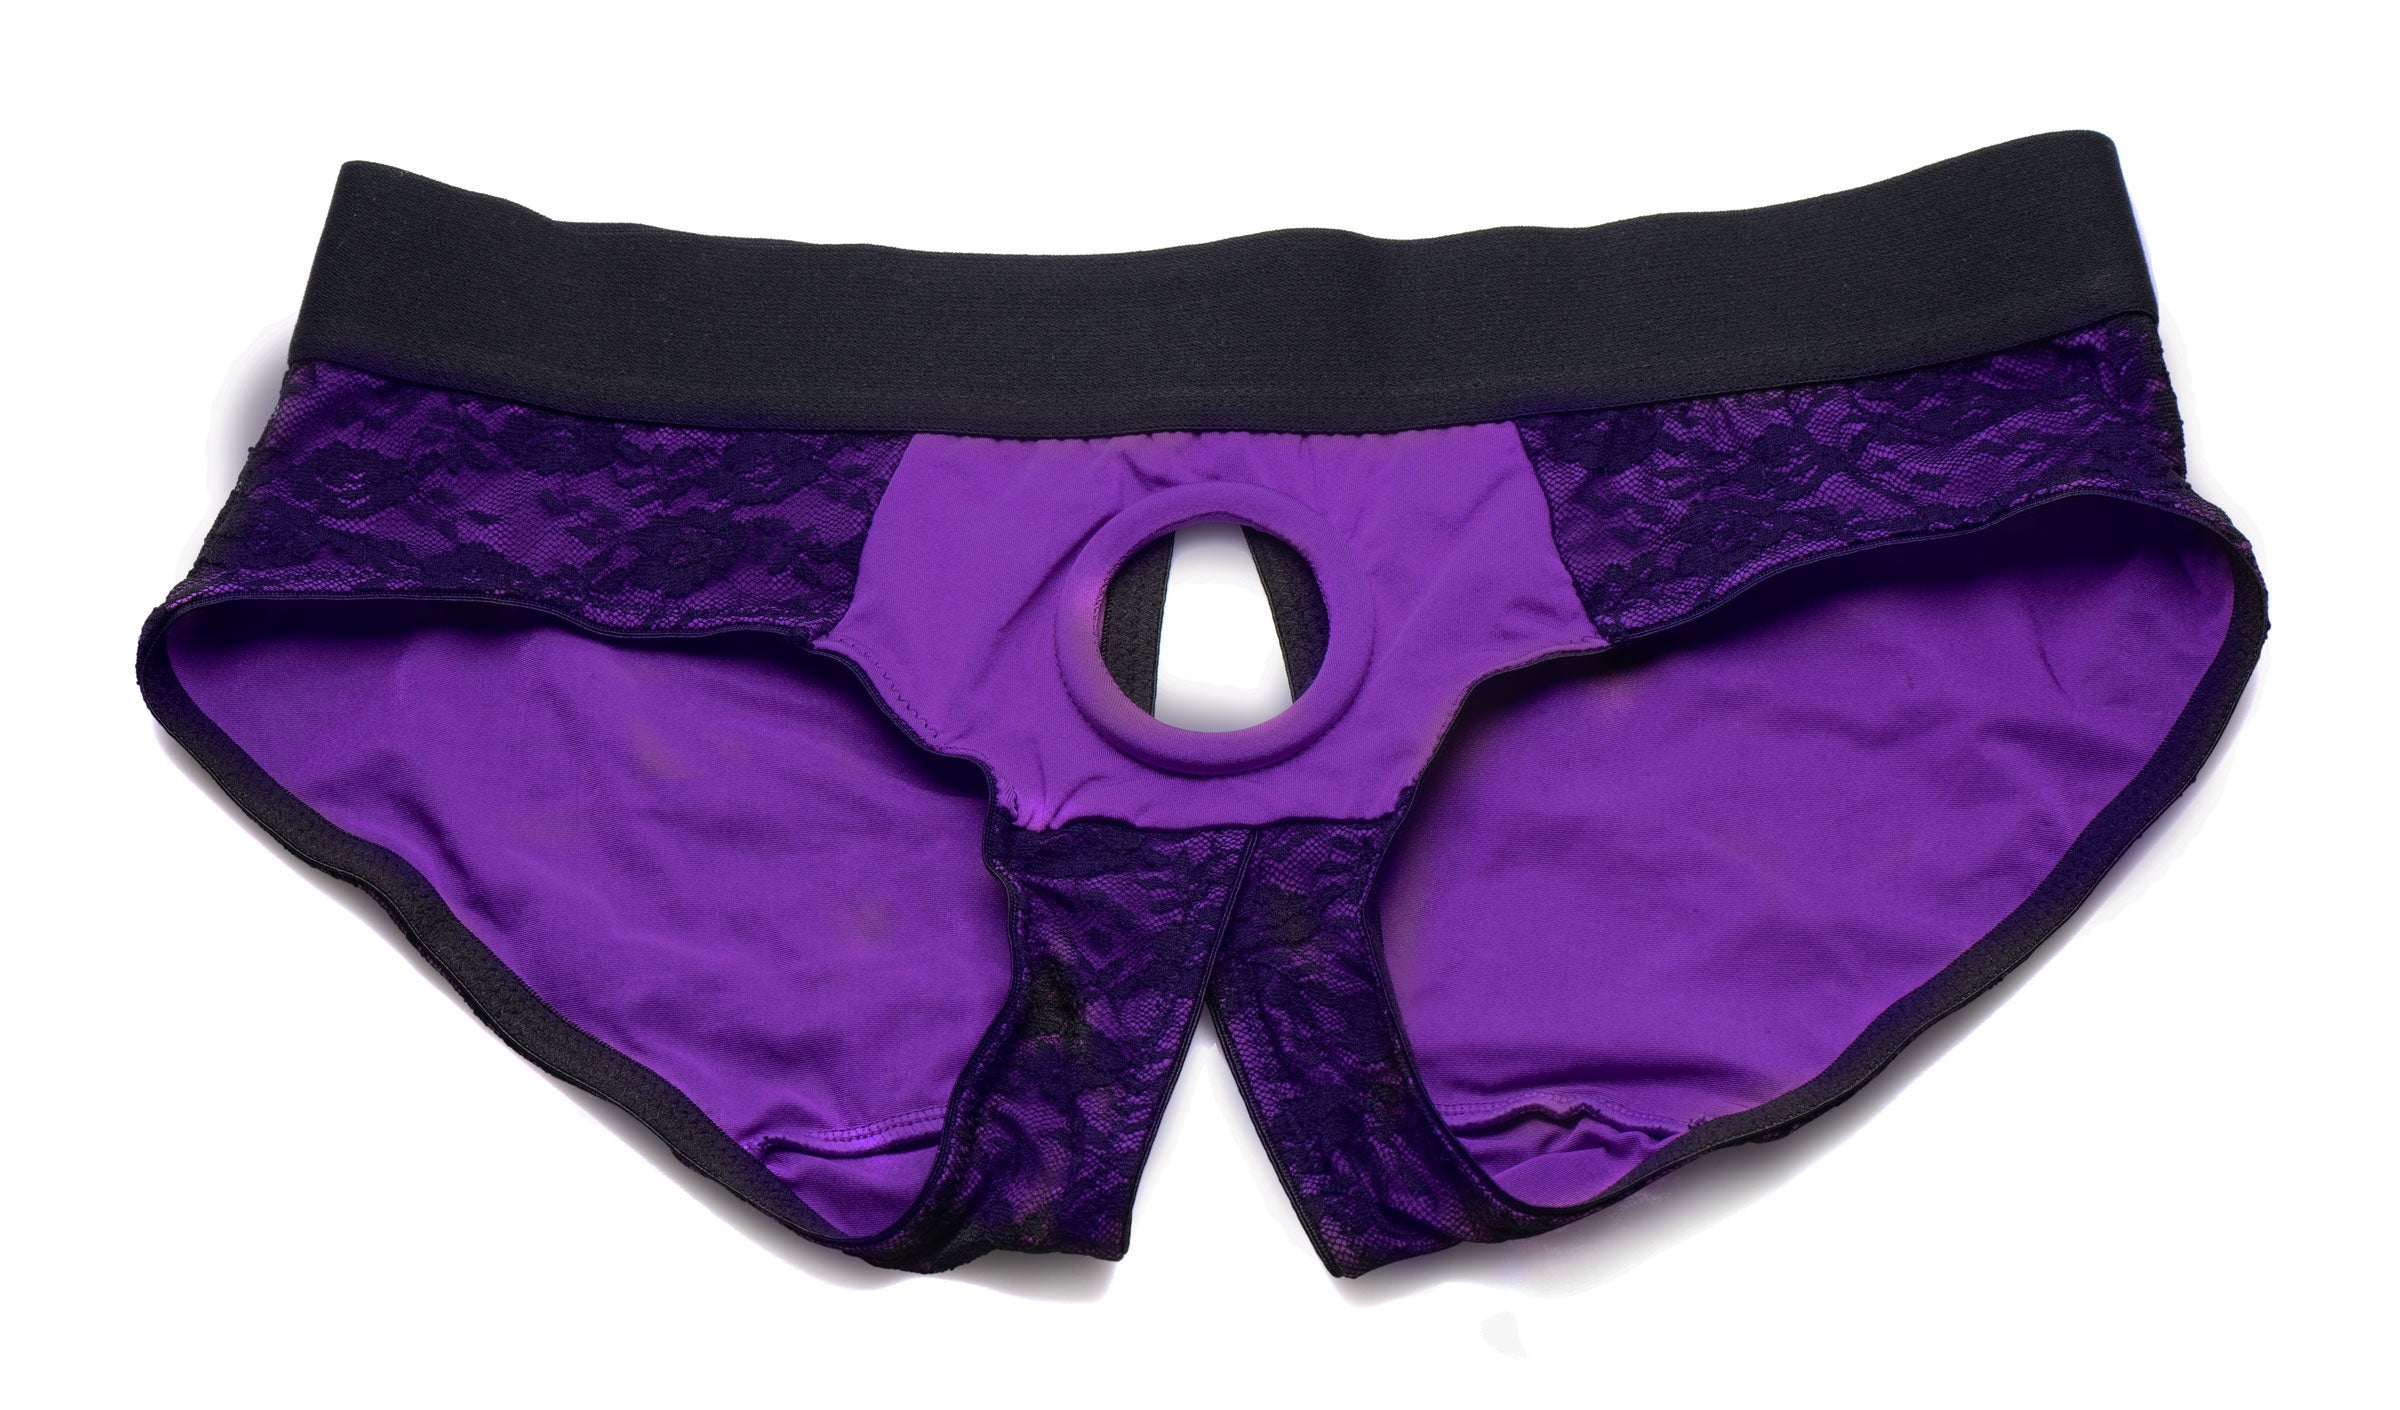 Lace Envy Crotchless Panty Harness - S/ M Black and Purple